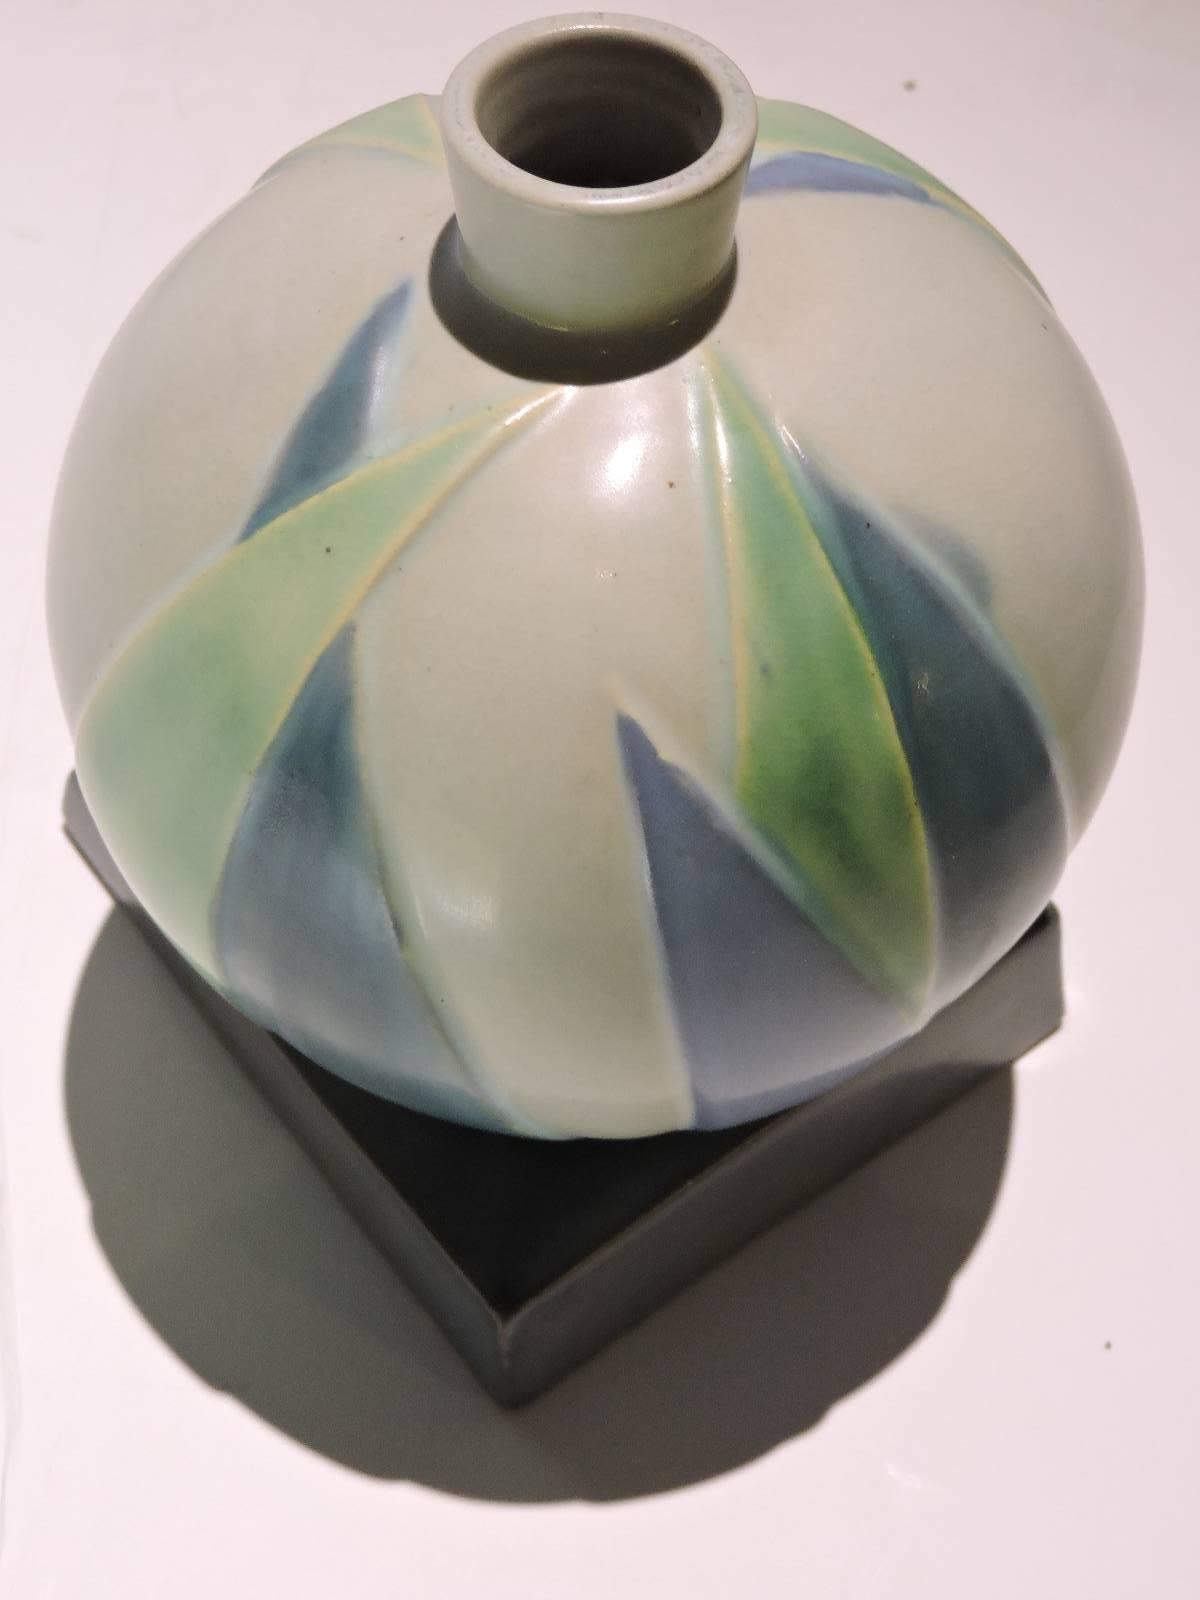 A Roseville Futura American Art Deco design vase having a trapezoidal base balancing a ball form with stylized raised lotus leaves. Guaranteed 100% vintage Roseville Pottery dating from the 1920s.